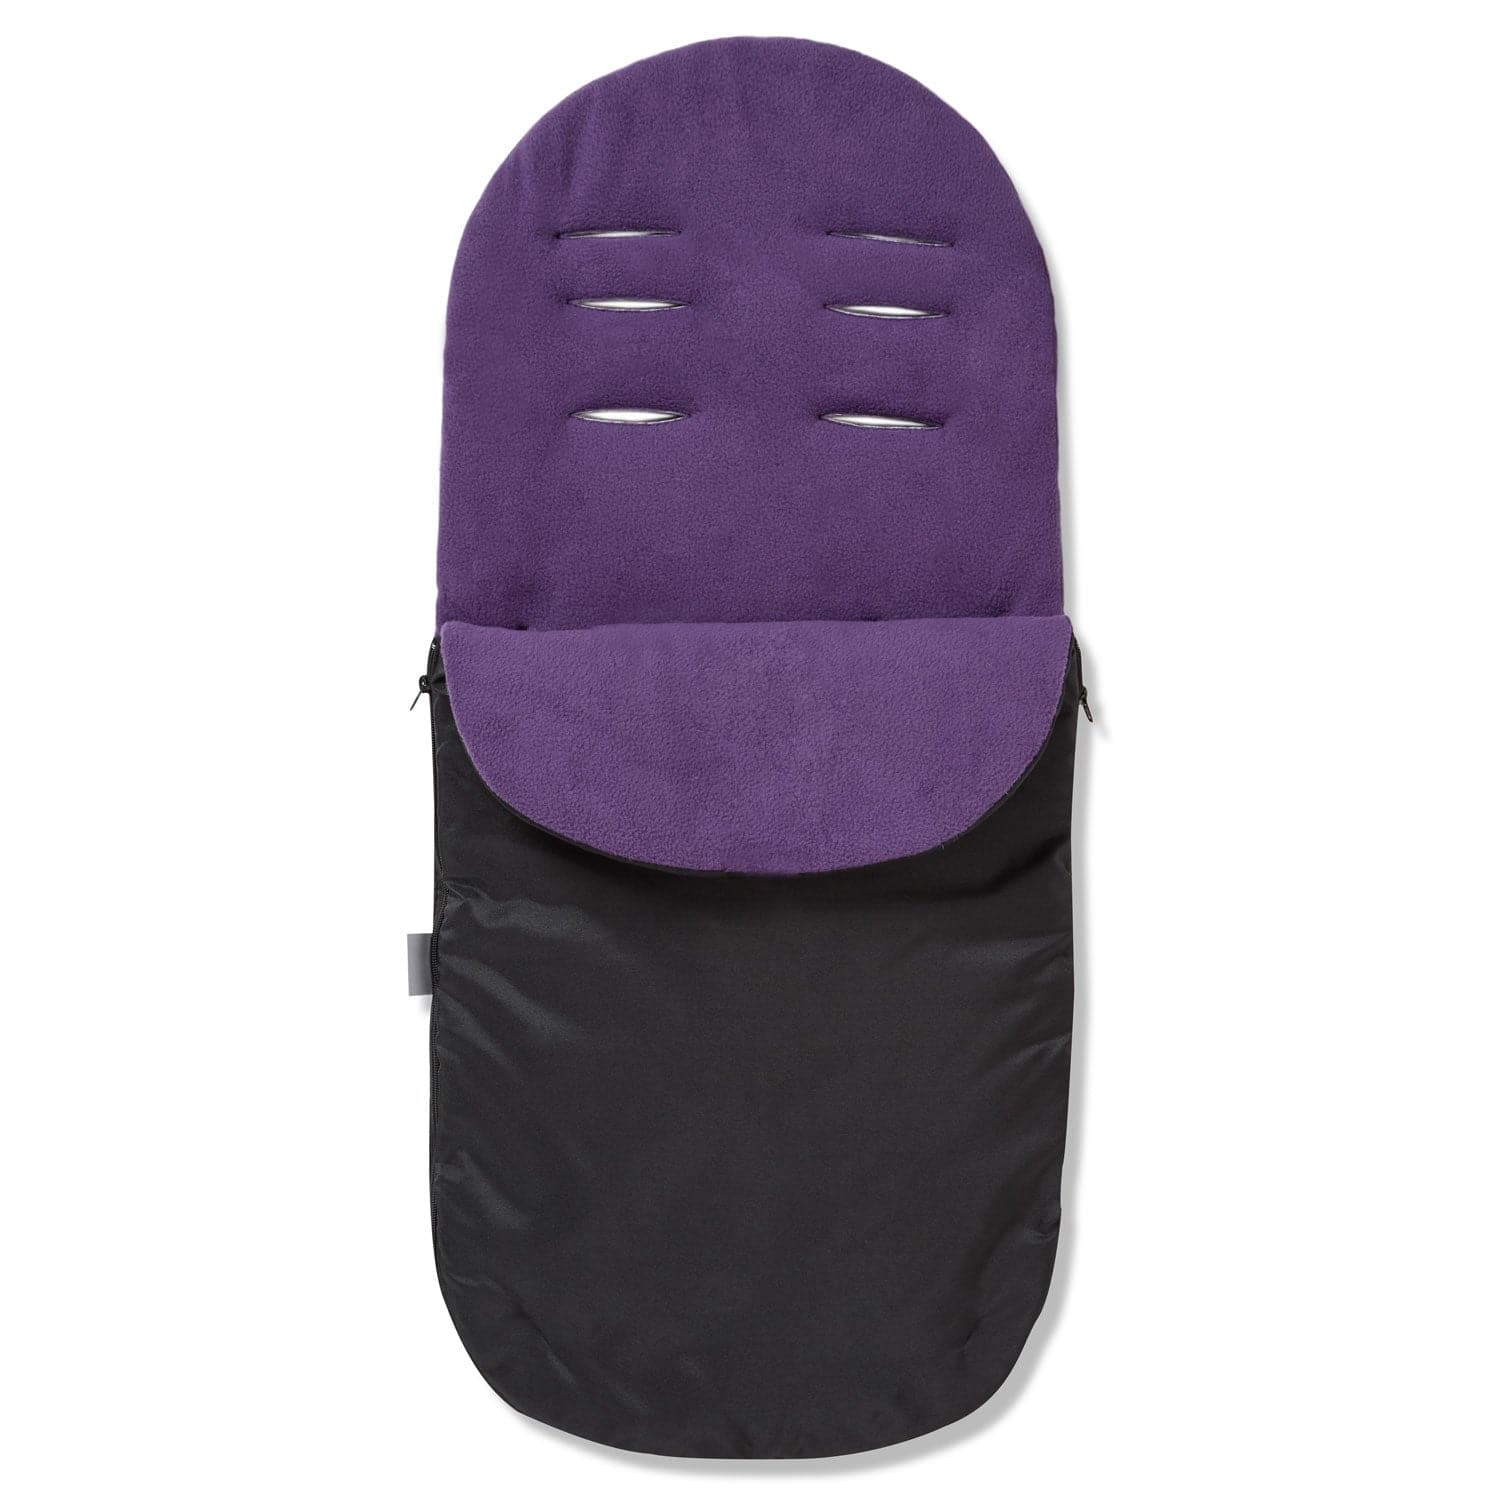 Footmuff / Cosy Toes Compatible with Red Castle - Purple / Fits All Models | For Your Little One